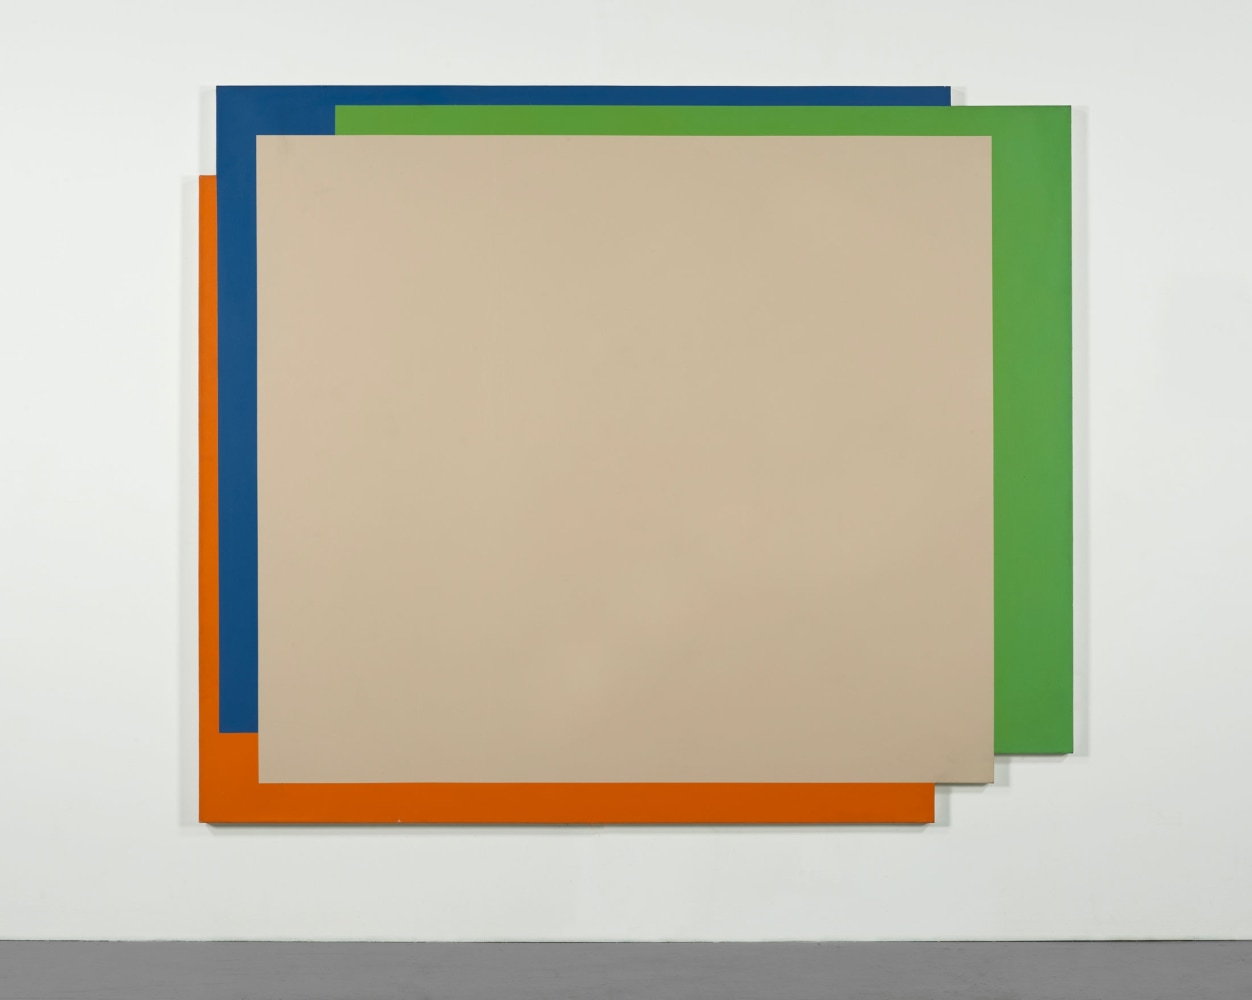 Jeremy Moon
15/73, 1973
Acrylic on shaped canvas
74 1/8 x 87 3/4 inches
(188 x 223 cm)